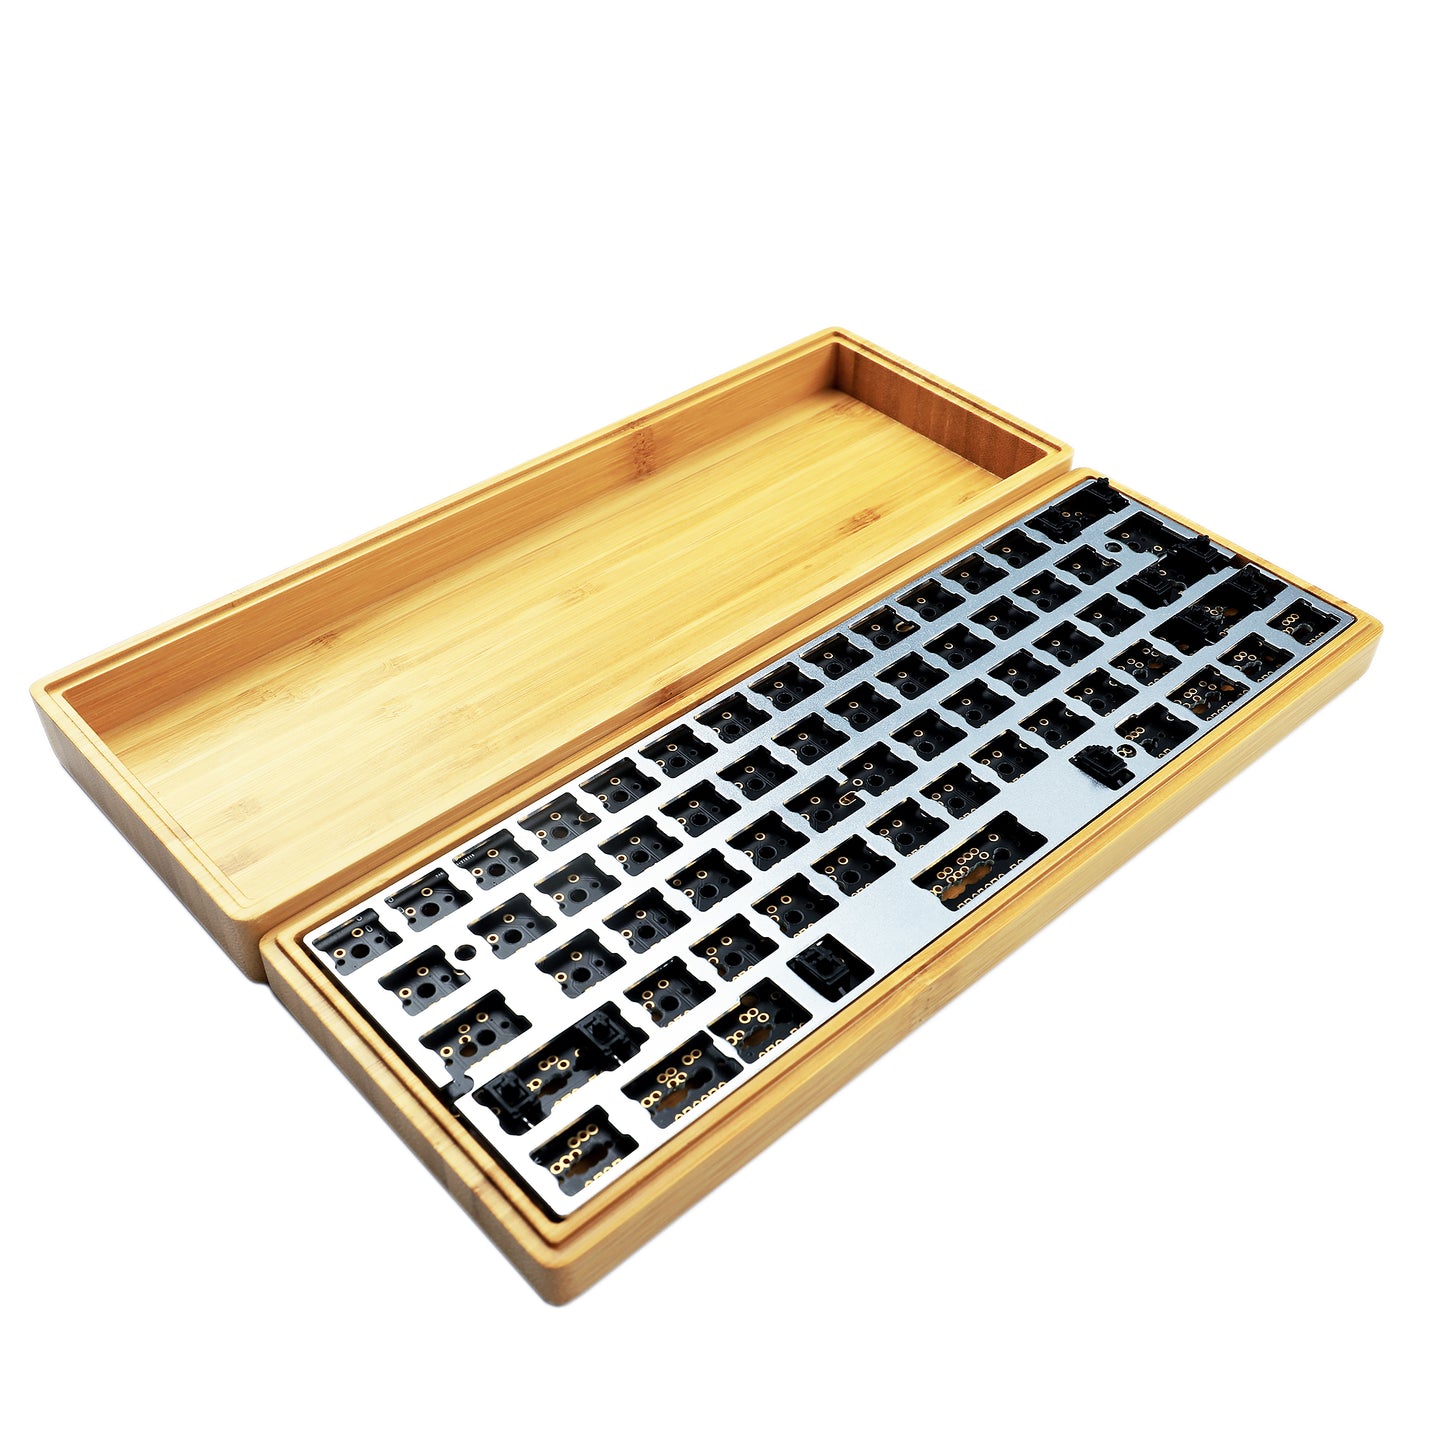 YMD-60% GH60 Splitted Wood Case Kit(QMK Soldering Supported/ANSI ISO Multi-Layout Supported)